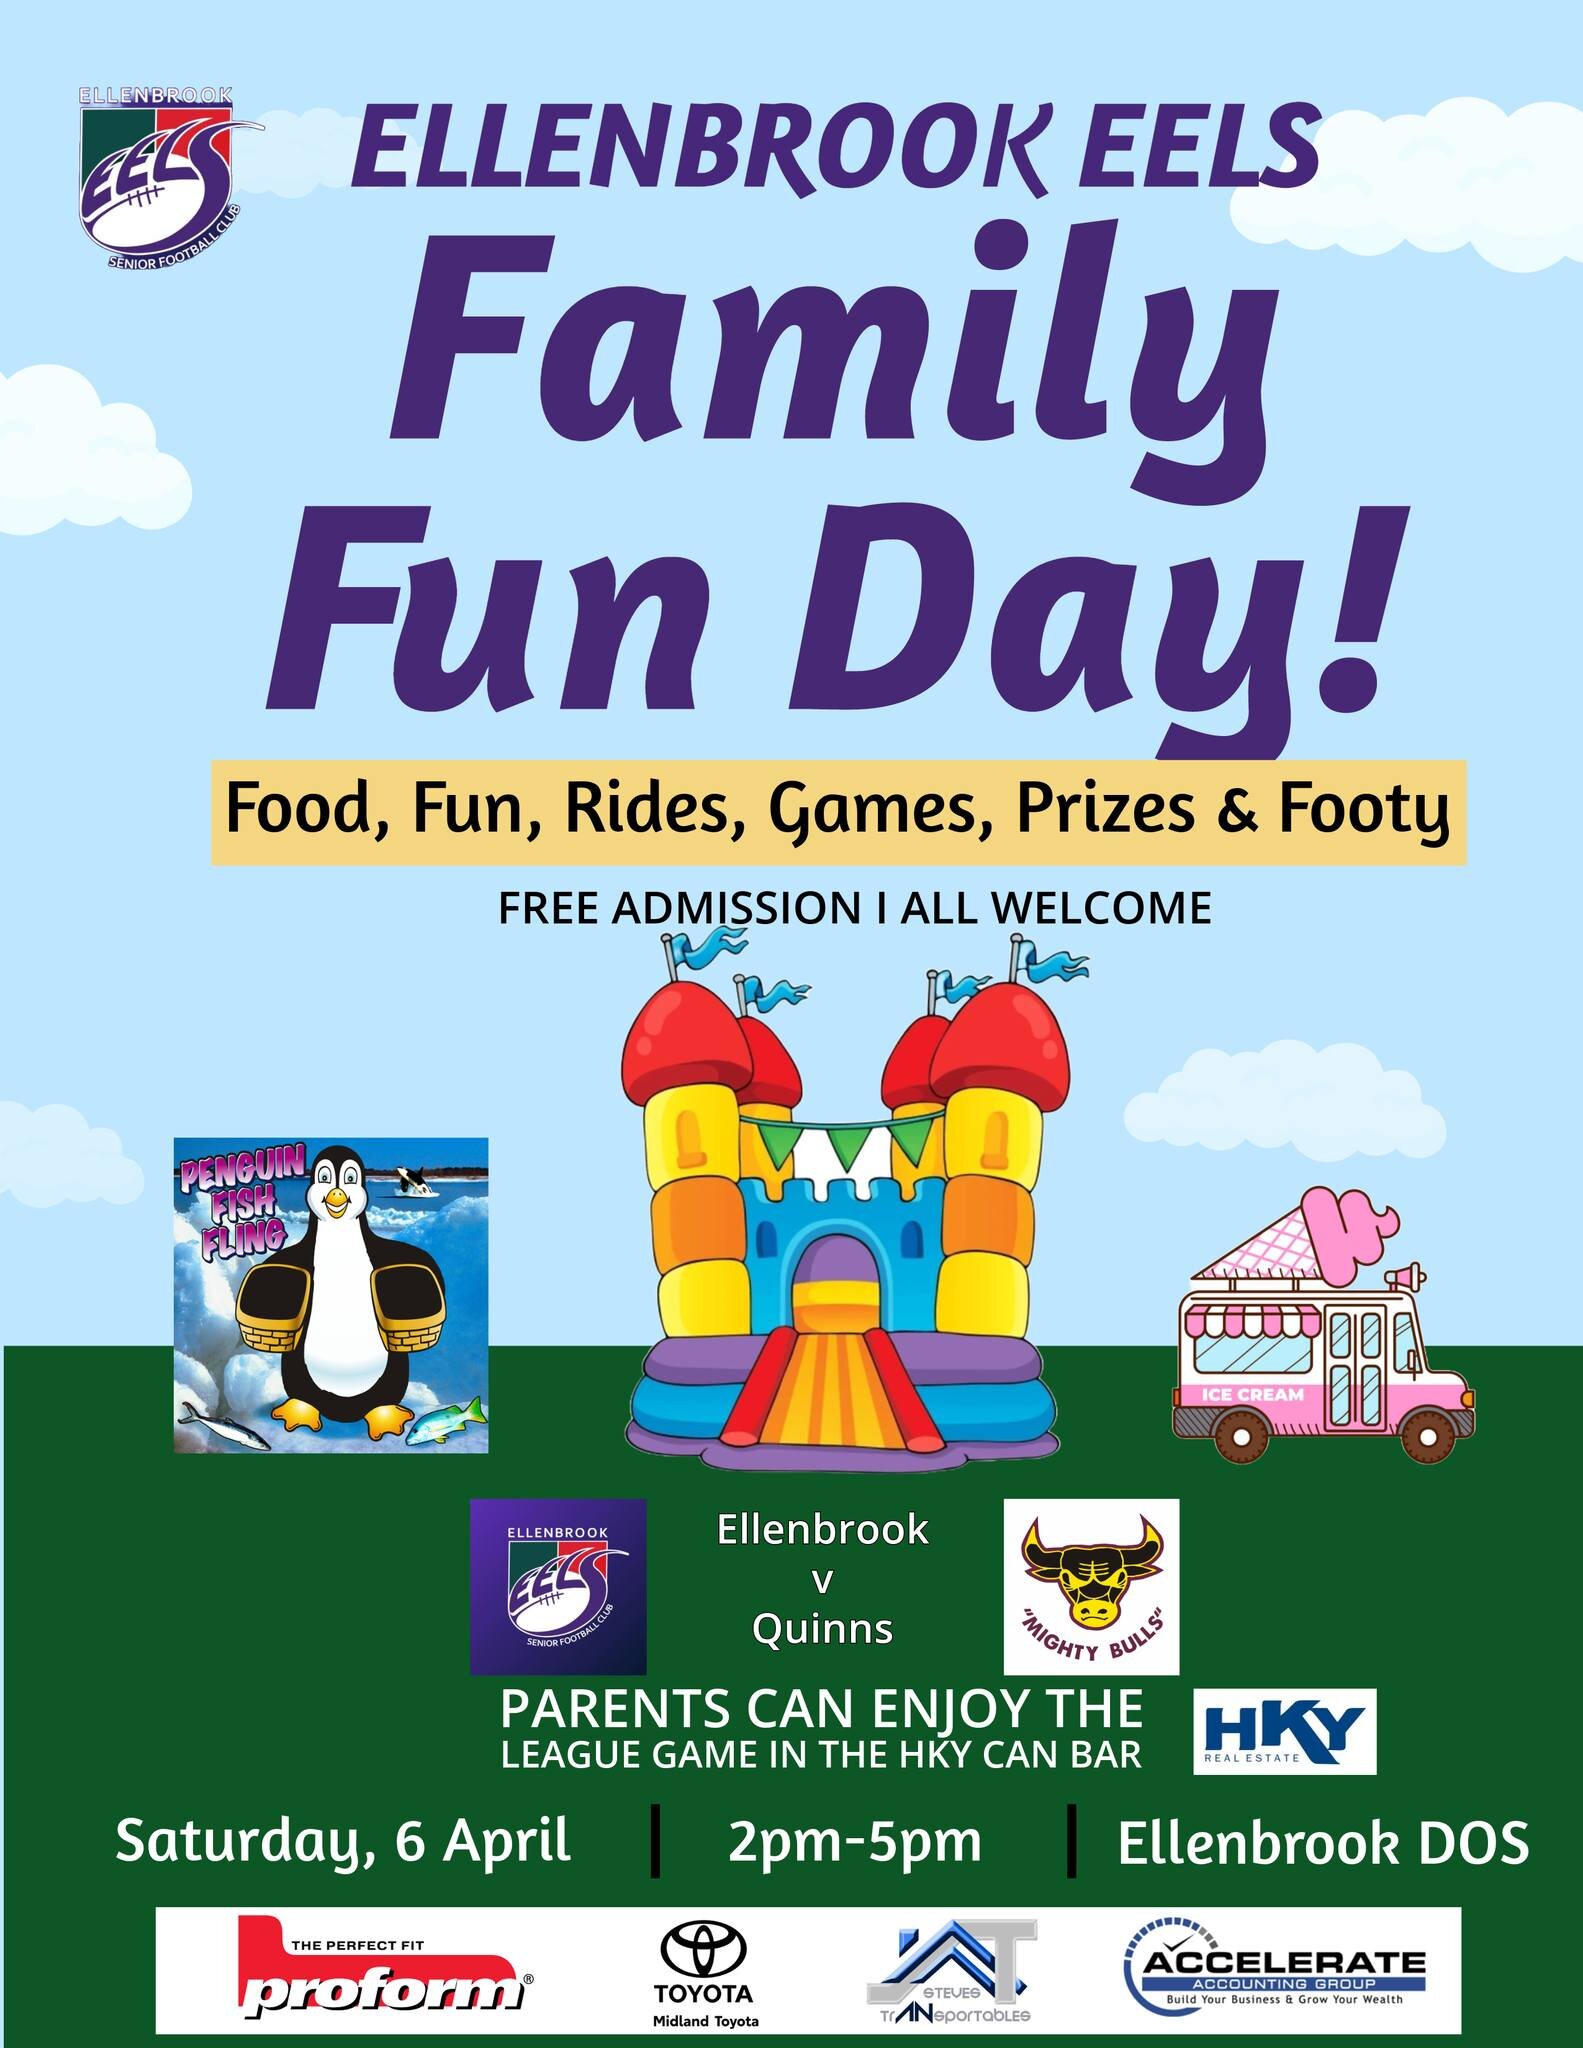 The Ellenbrook Senior Football Club invites you to join our Family Fun Day for Round One at the Ellenbrook District Open Space. 

This free event is open to everyone, and will feature:

Rides ✅
Bouncy Castles ✅
Extreme Ninja Course ✅
Carnival Fun Zon